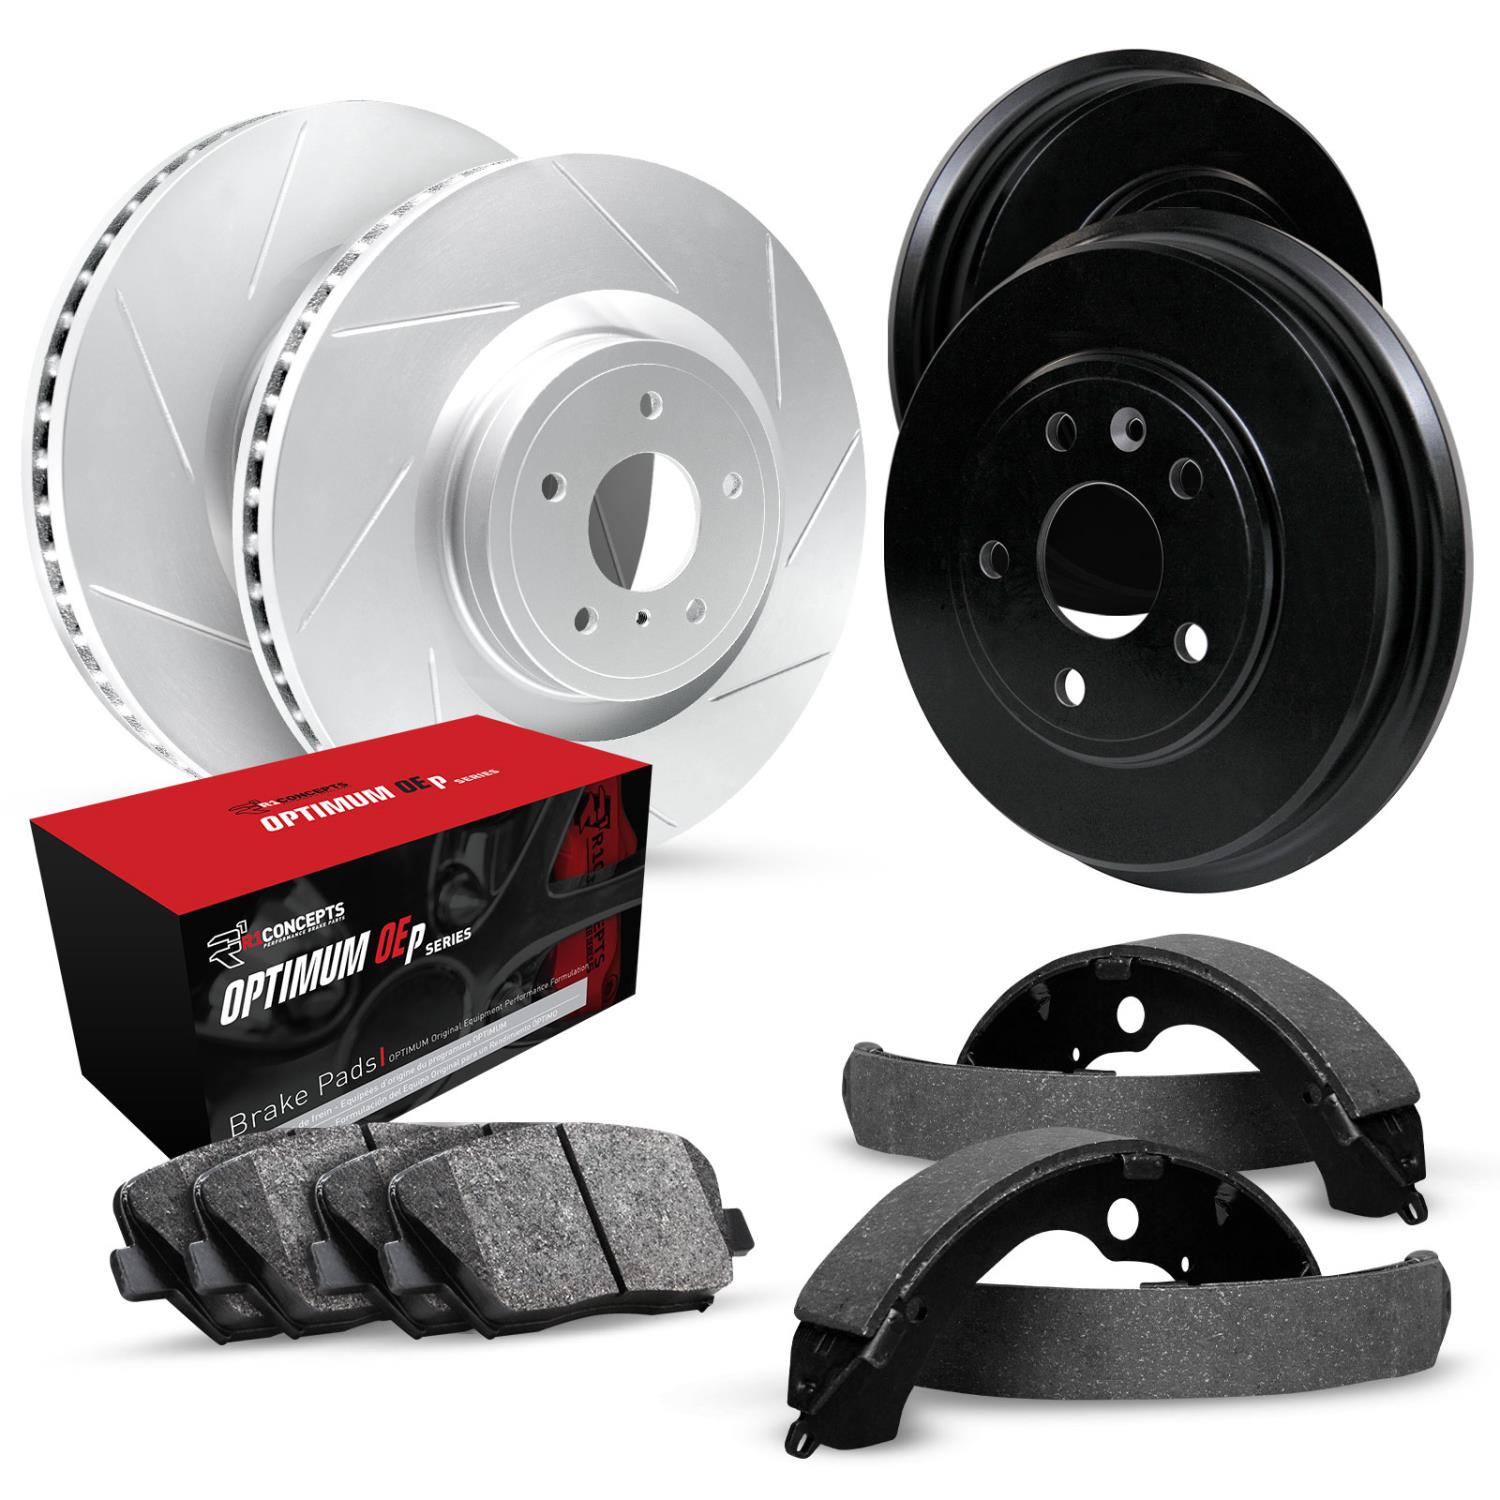 GEO-Carbon Slotted Brake Rotor & Drum Set w/Optimum OE Pads & Shoes, 2001-2005 Lexus/Toyota/Scion, Position: Front & Rear